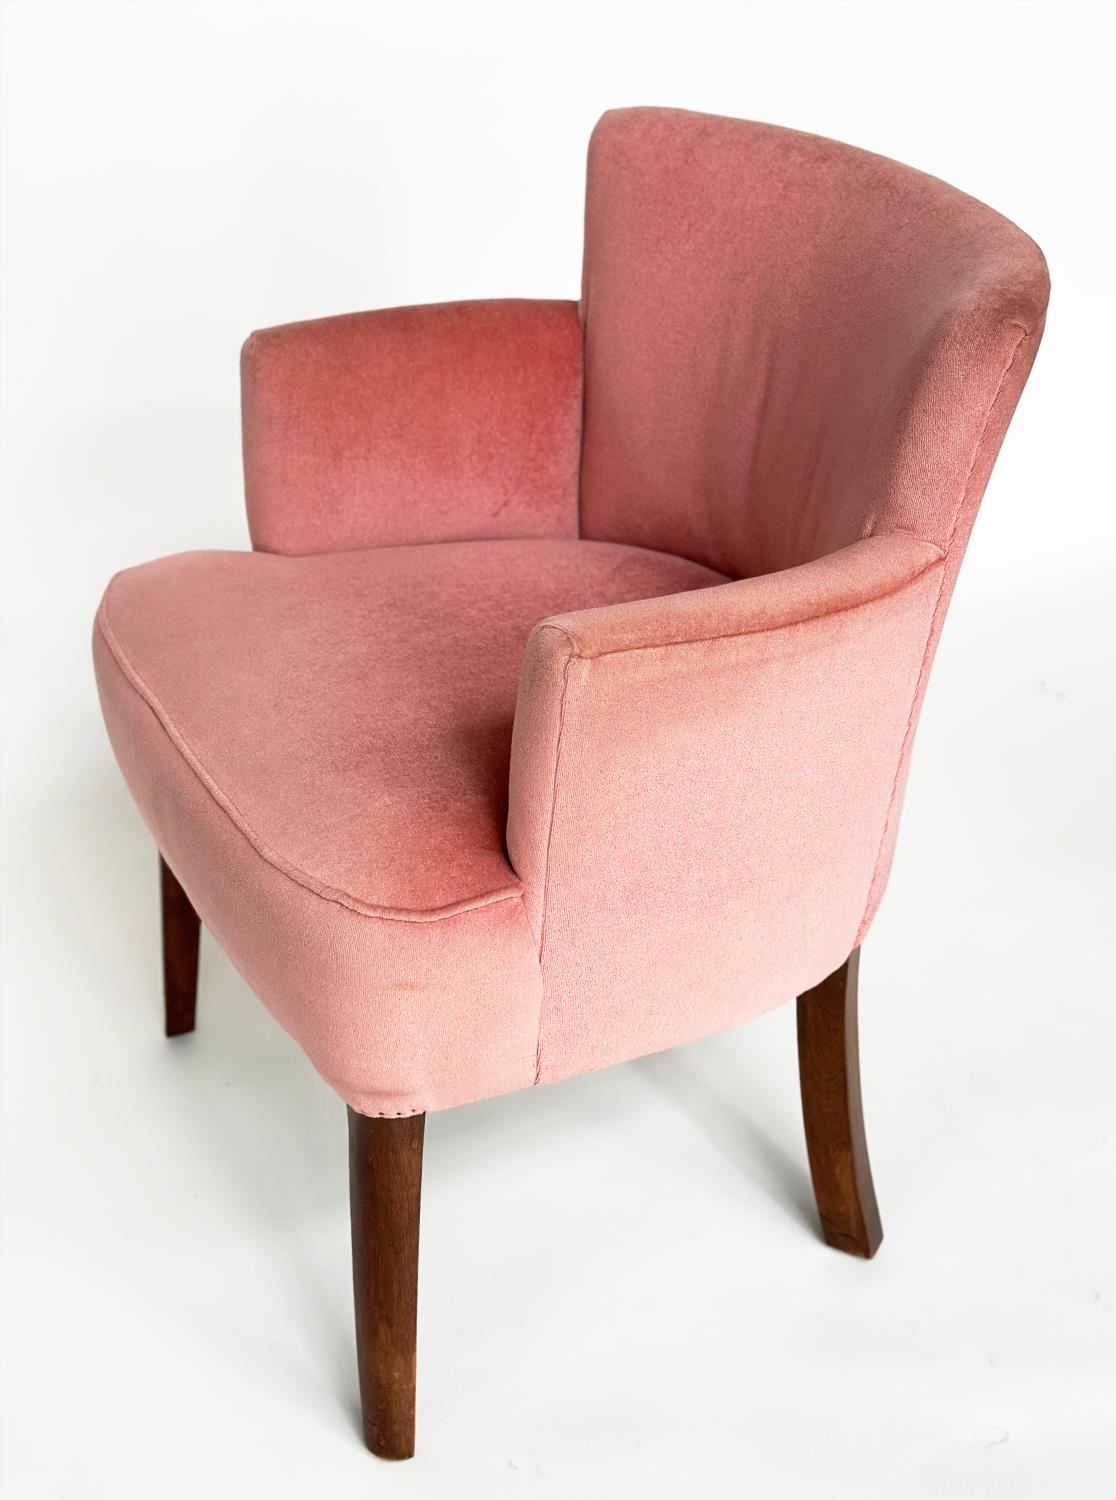 BRIDGE ARMCHAIR, mid 20th century rose velvet upholstered with tapering supports. - Image 2 of 6